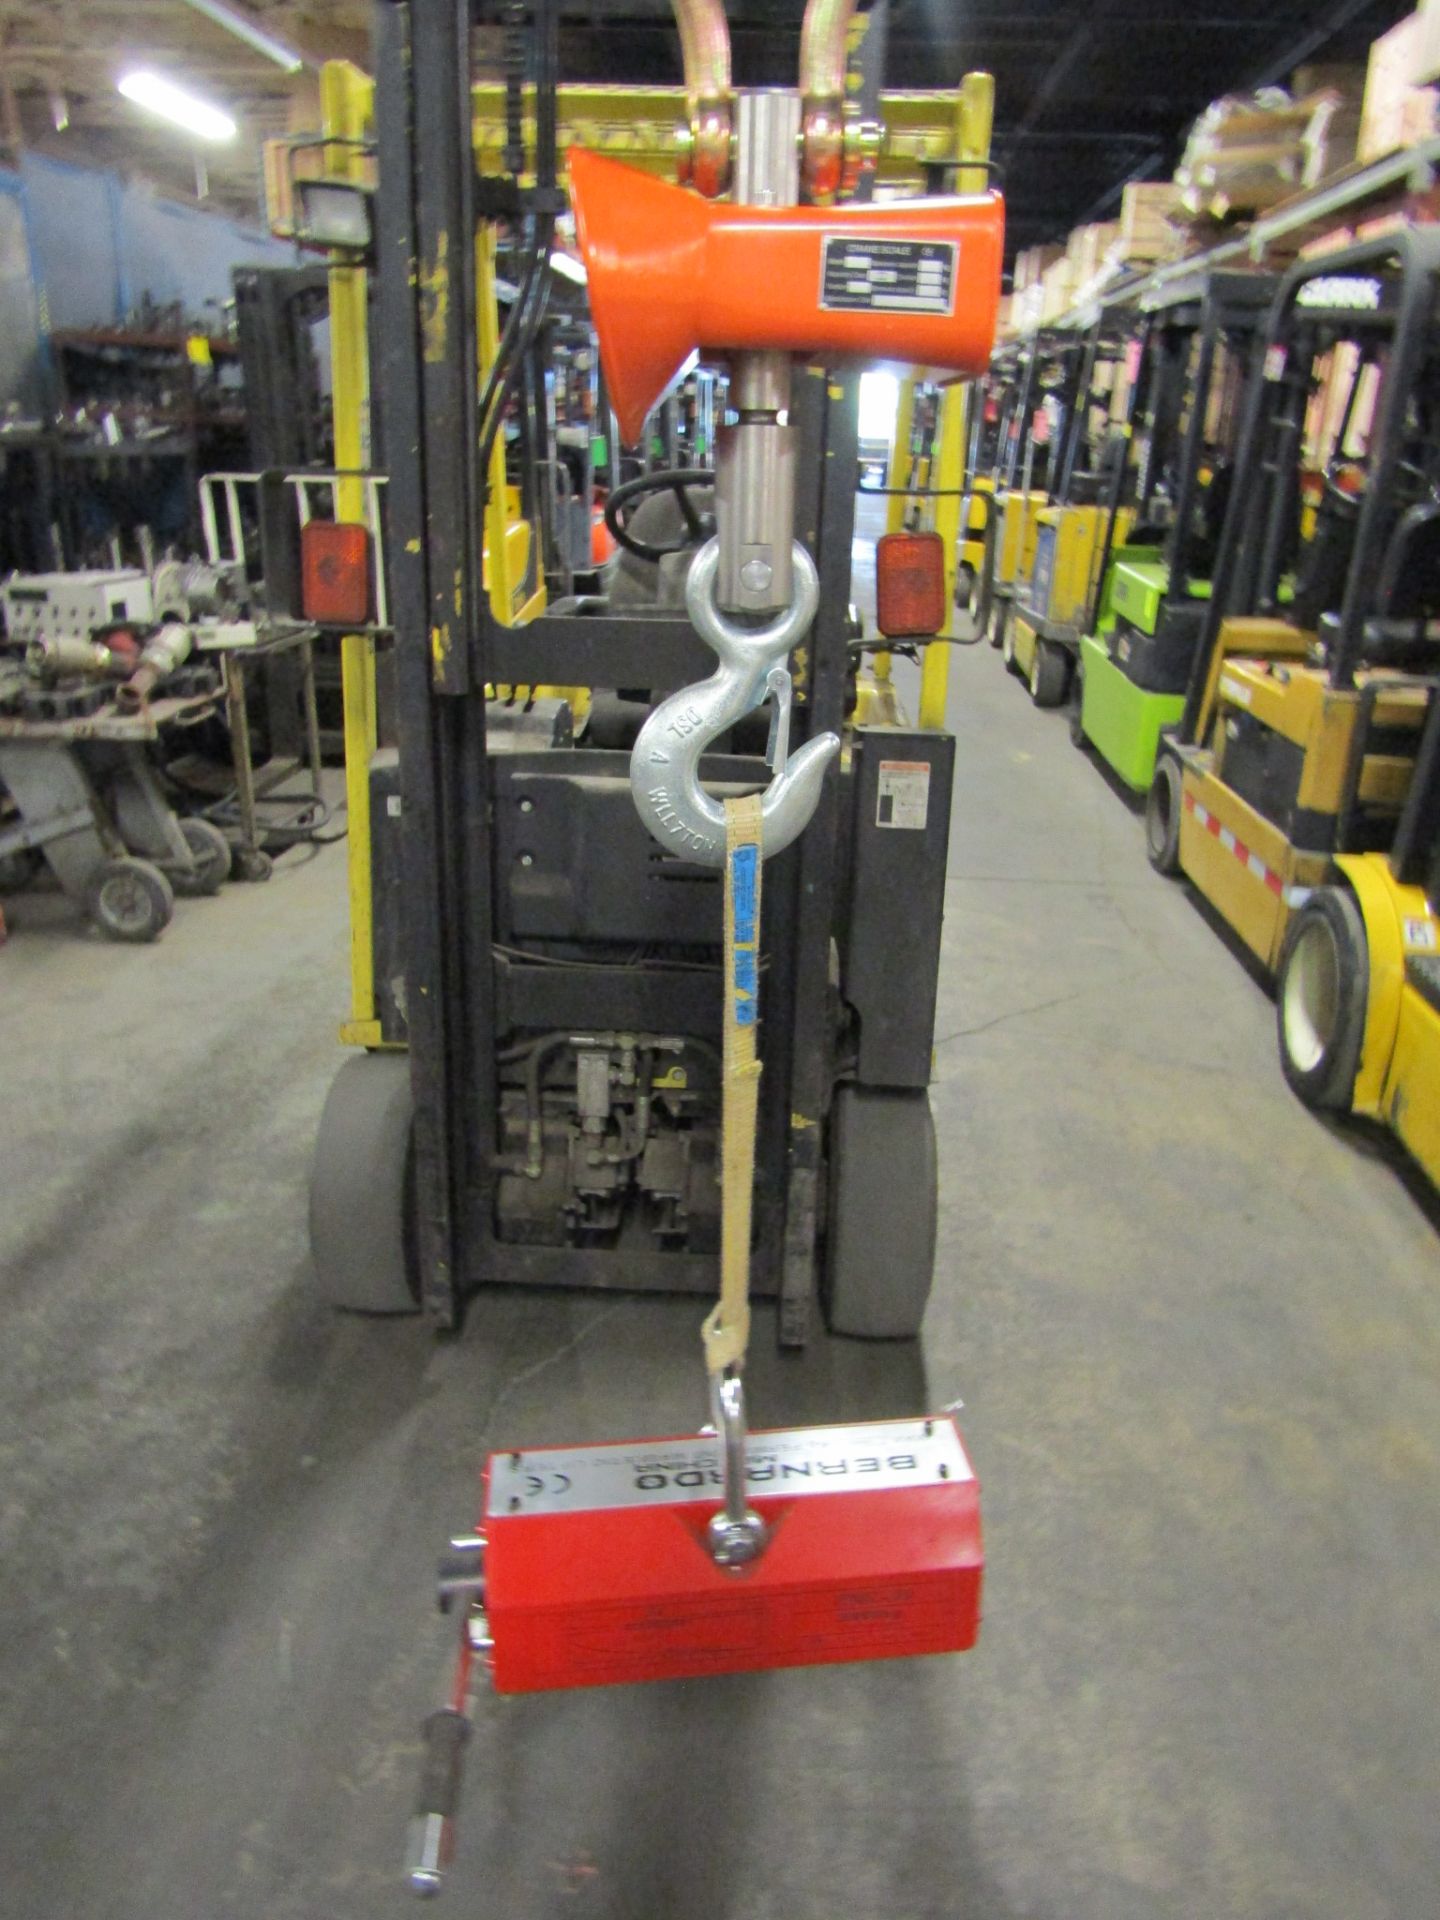 Hanging MINT Digital Crane Scale 30,000lbs 15 ton Capacity - complete with remote control and